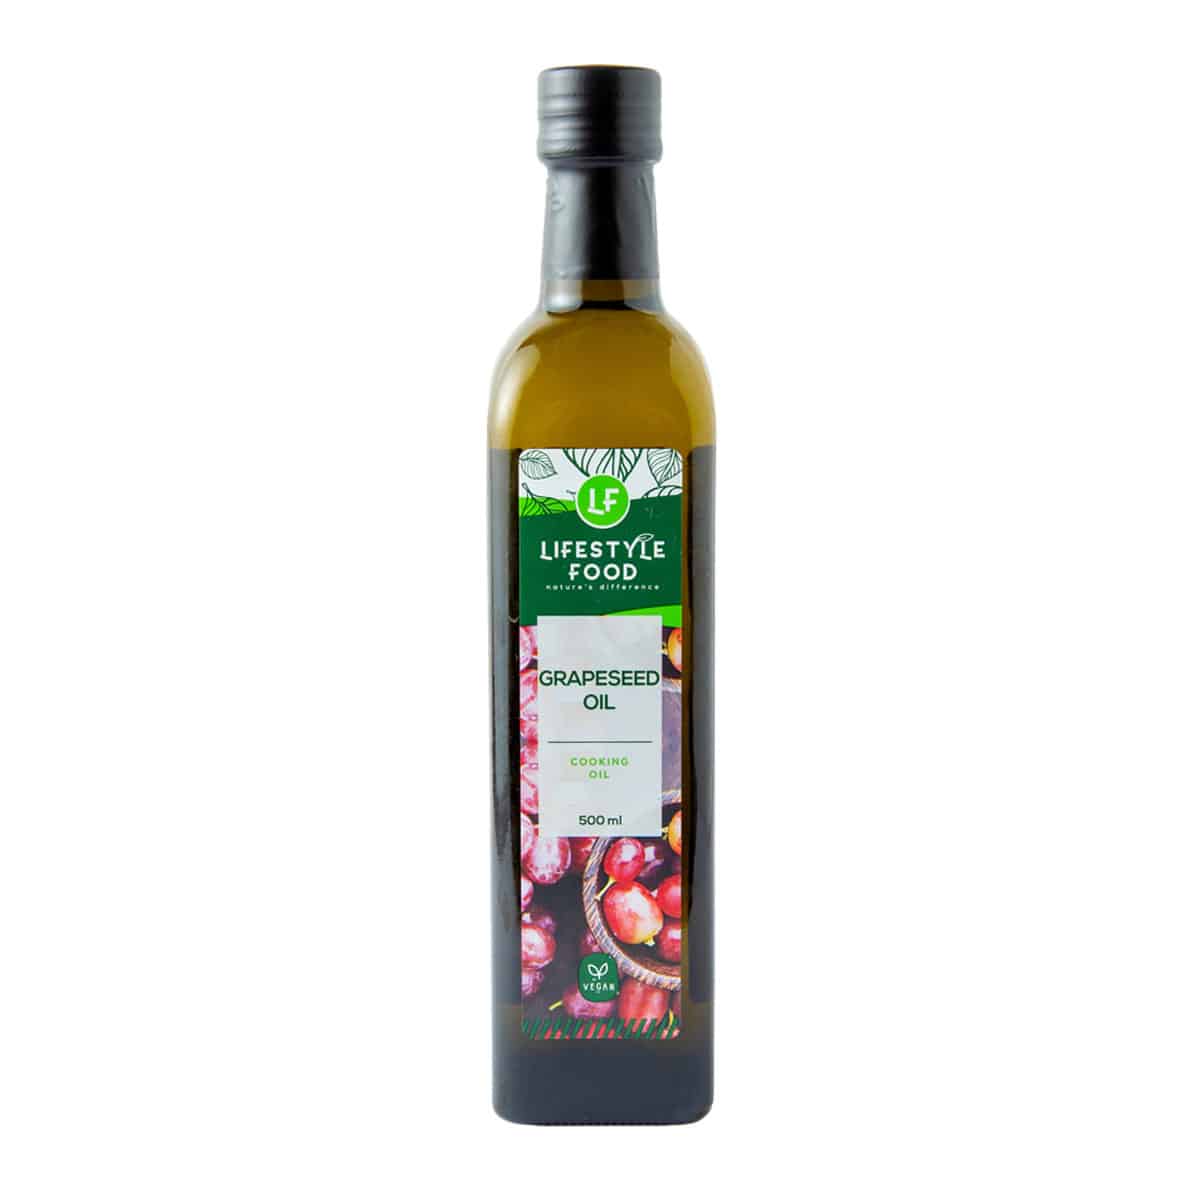 Lifestyle Food Grapeseed Cooking Oil - 500ml